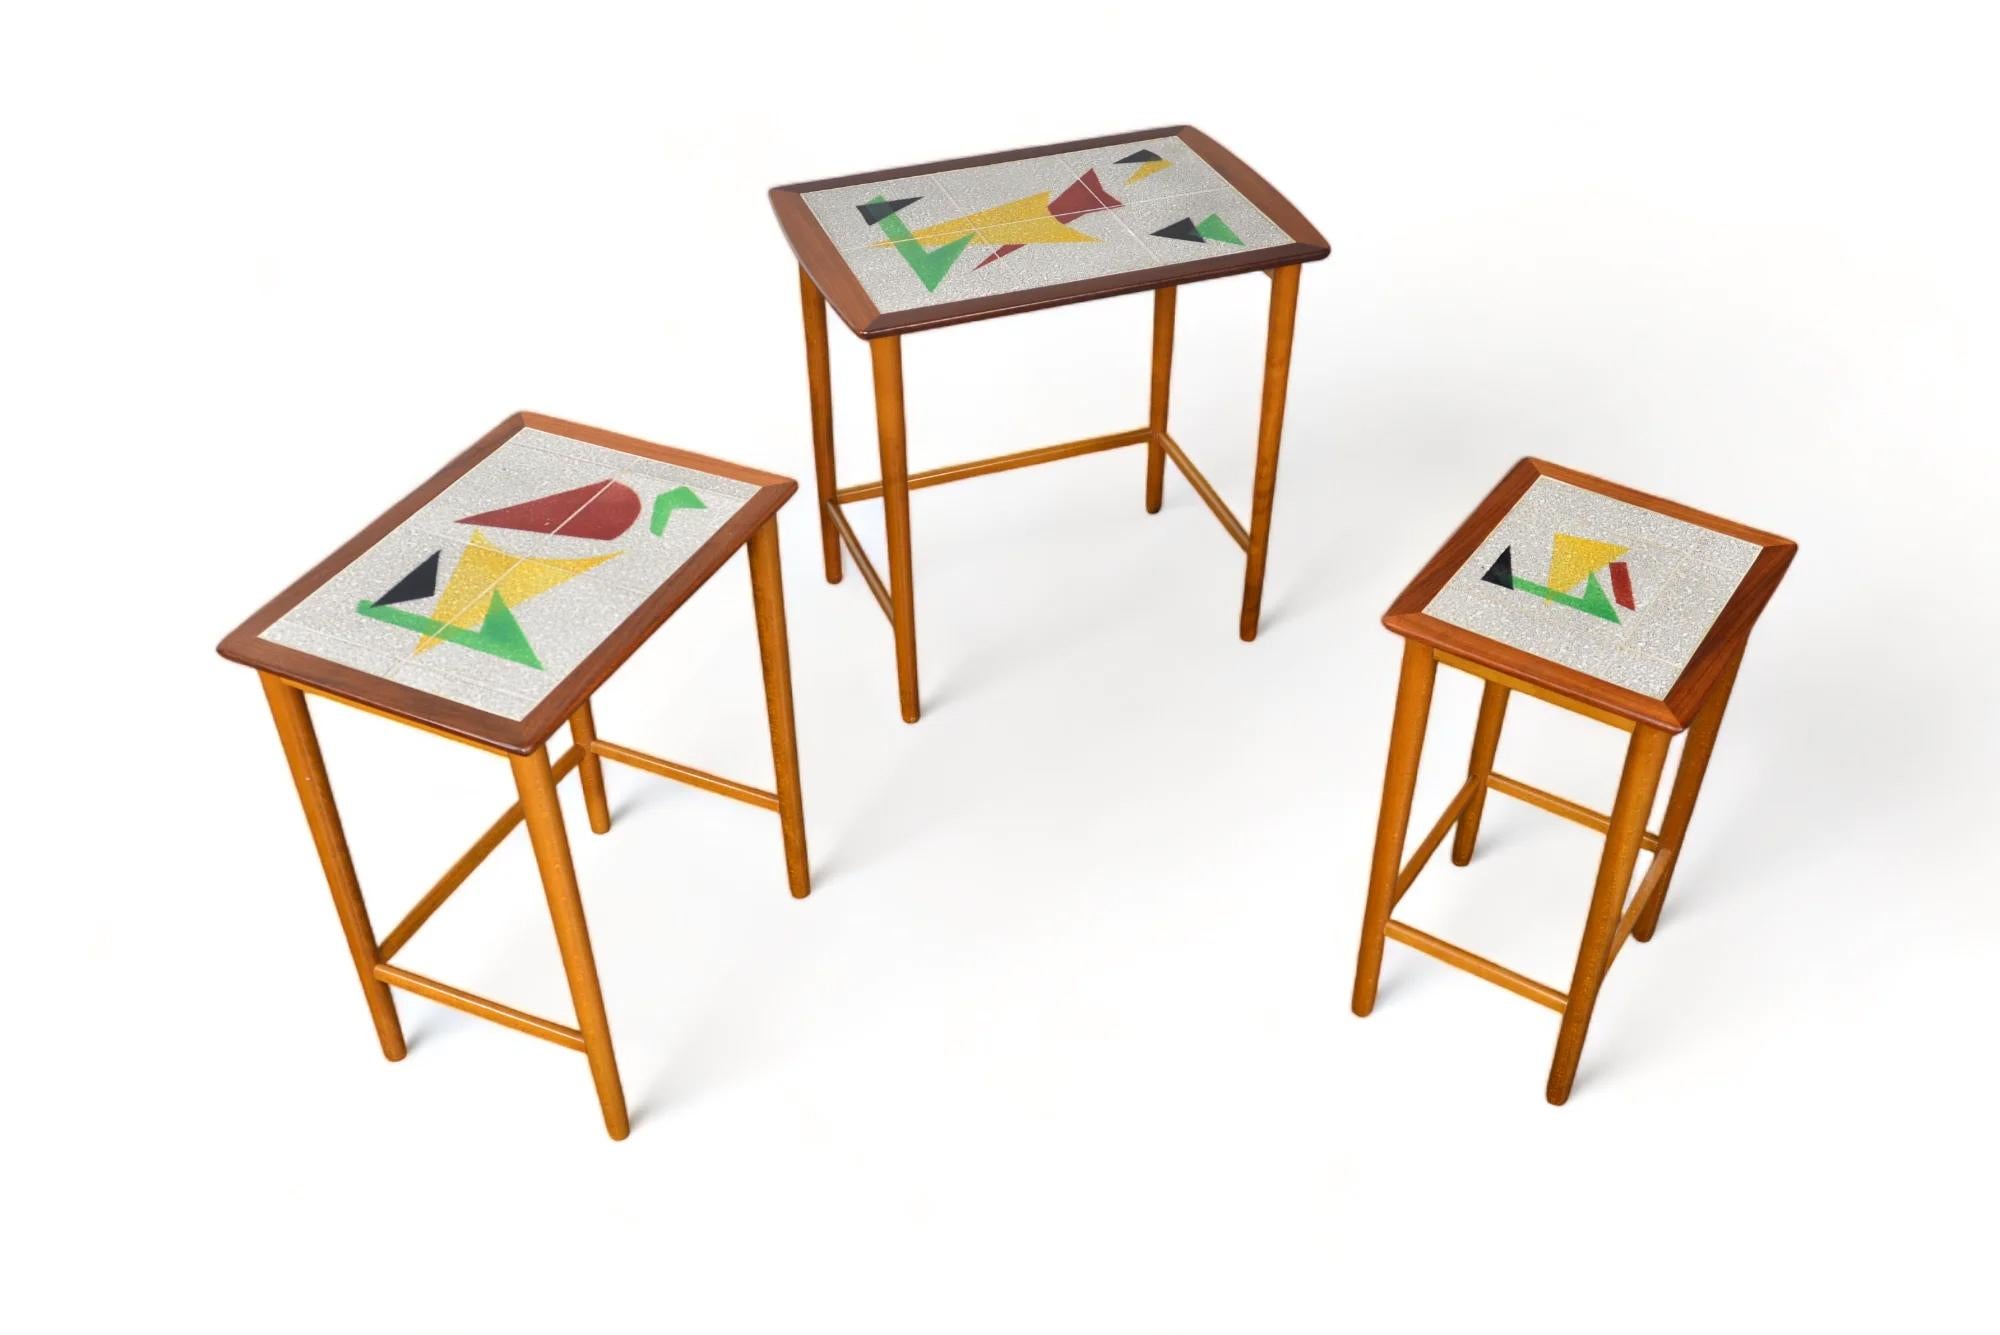 20th Century Set Of Atomic Teak Nesting Table With Tile Tops For Sale